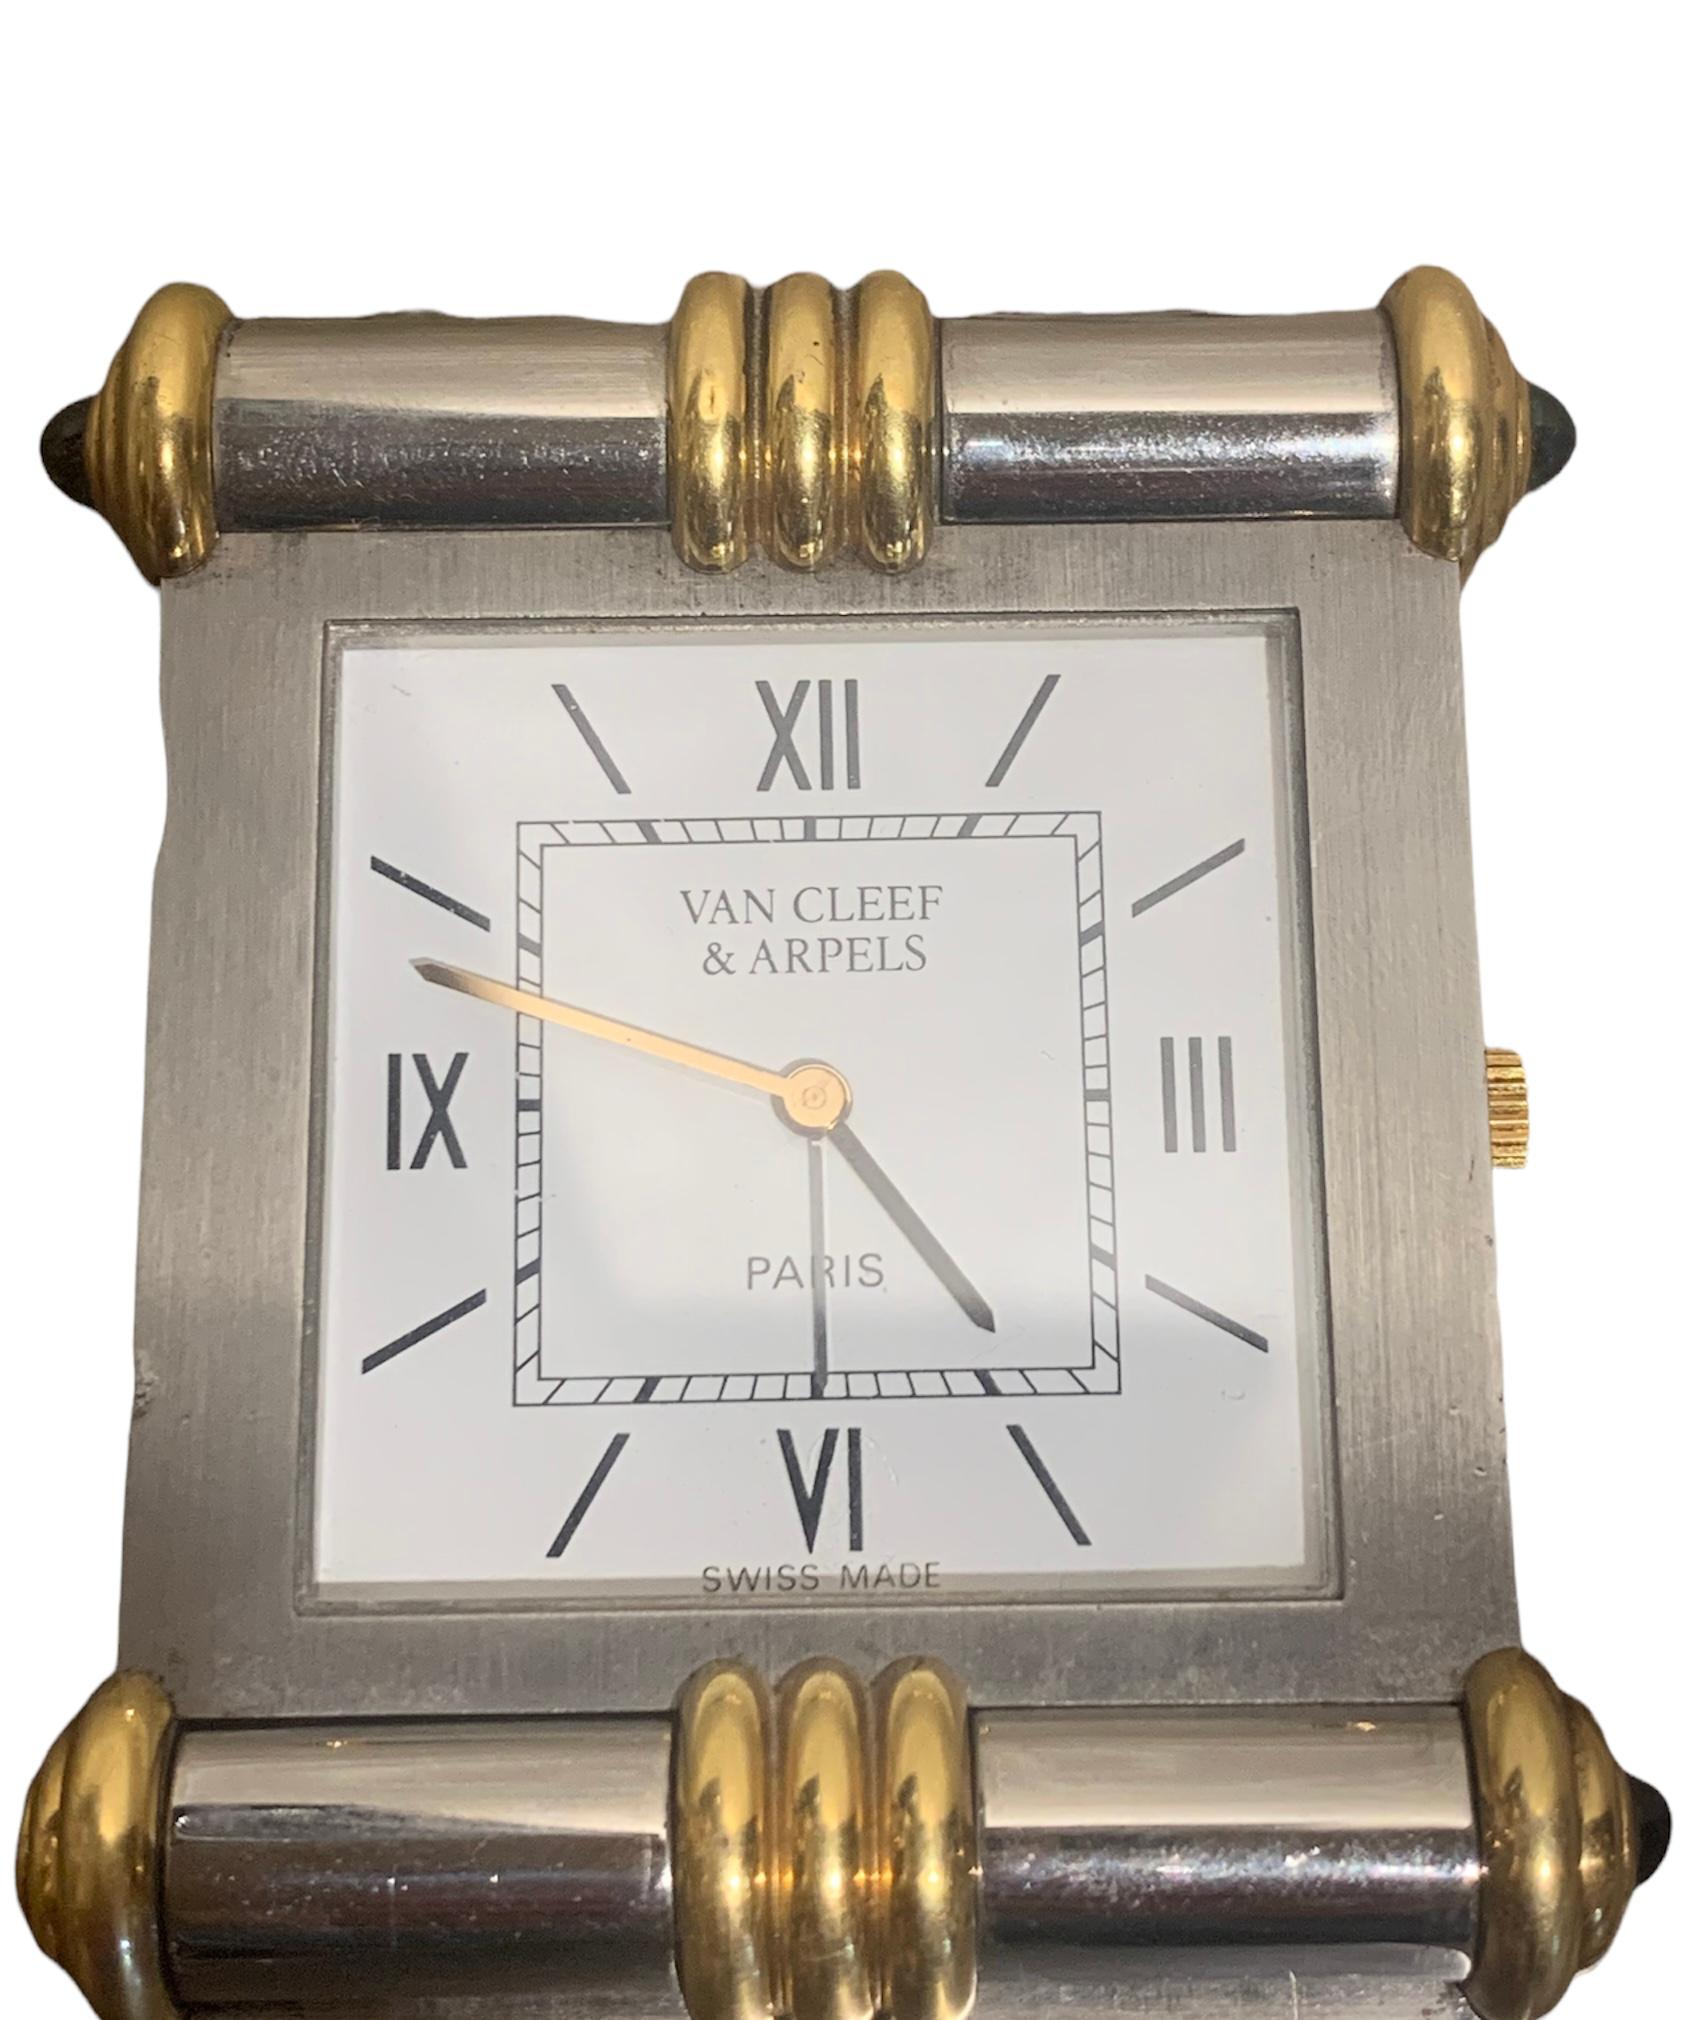 A fine travel clock Van Cleef & Arpels in steel and yellow gold.

Thanks to its articulated plate, it opens to reveal its square dial.

Each corner is set with a blue stone.

Dimensions: 58.18 x 46.09 x 8.10 mm (2.290 x 1.814 x 0.320